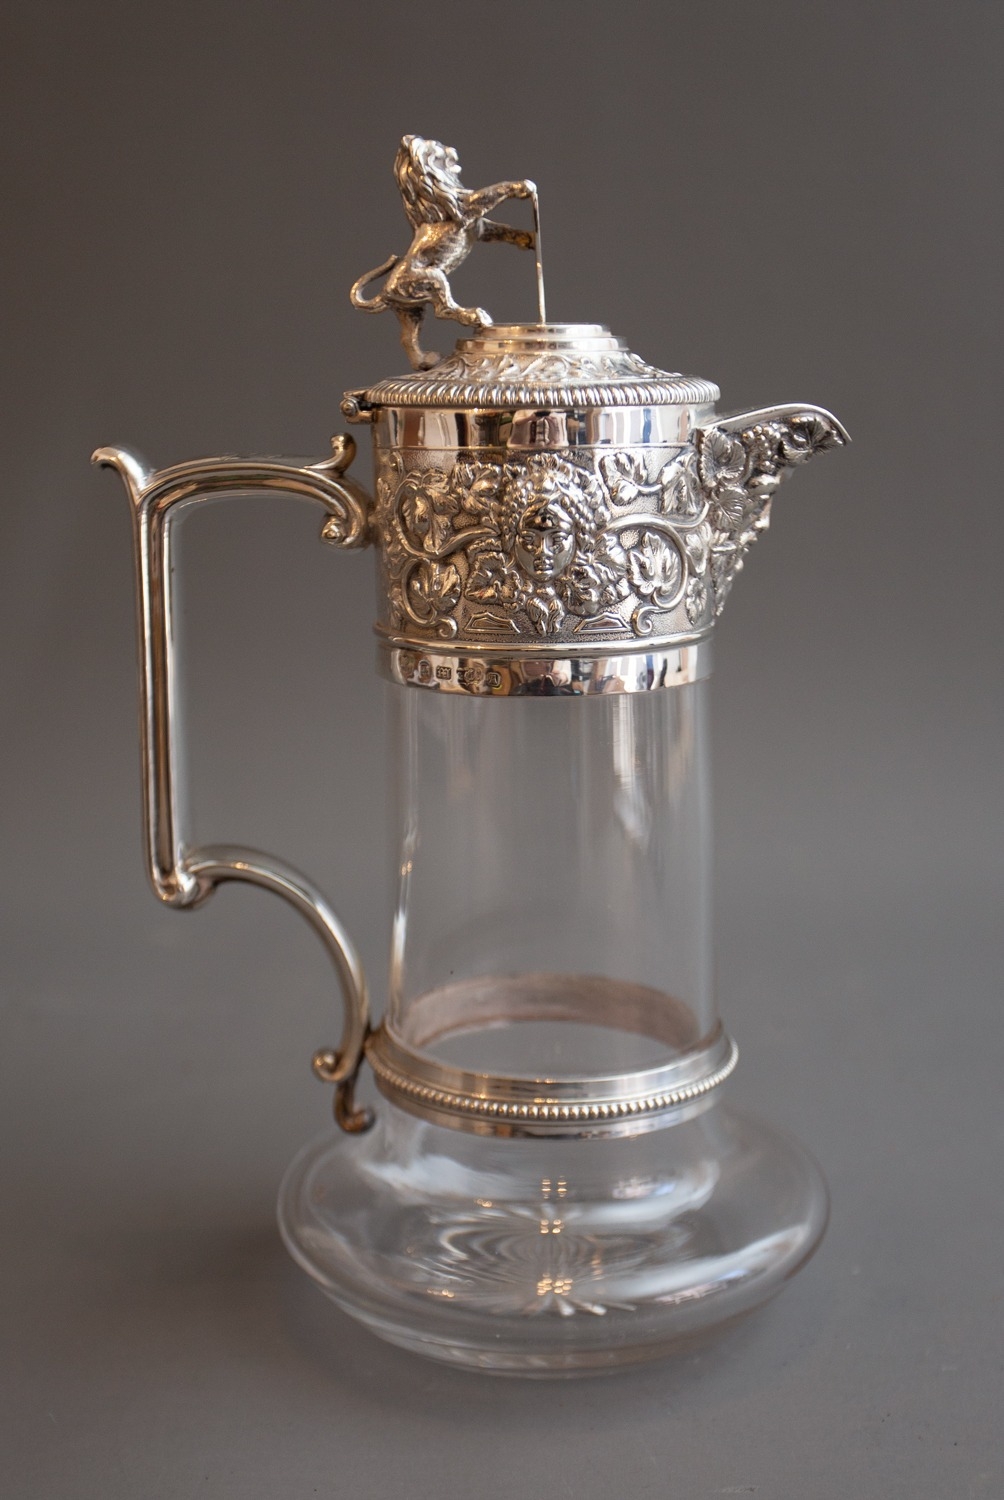 A Victorian Elkington & Co., Sheffield plate mounted glass claret jug, the collar and spout cast - Image 2 of 3